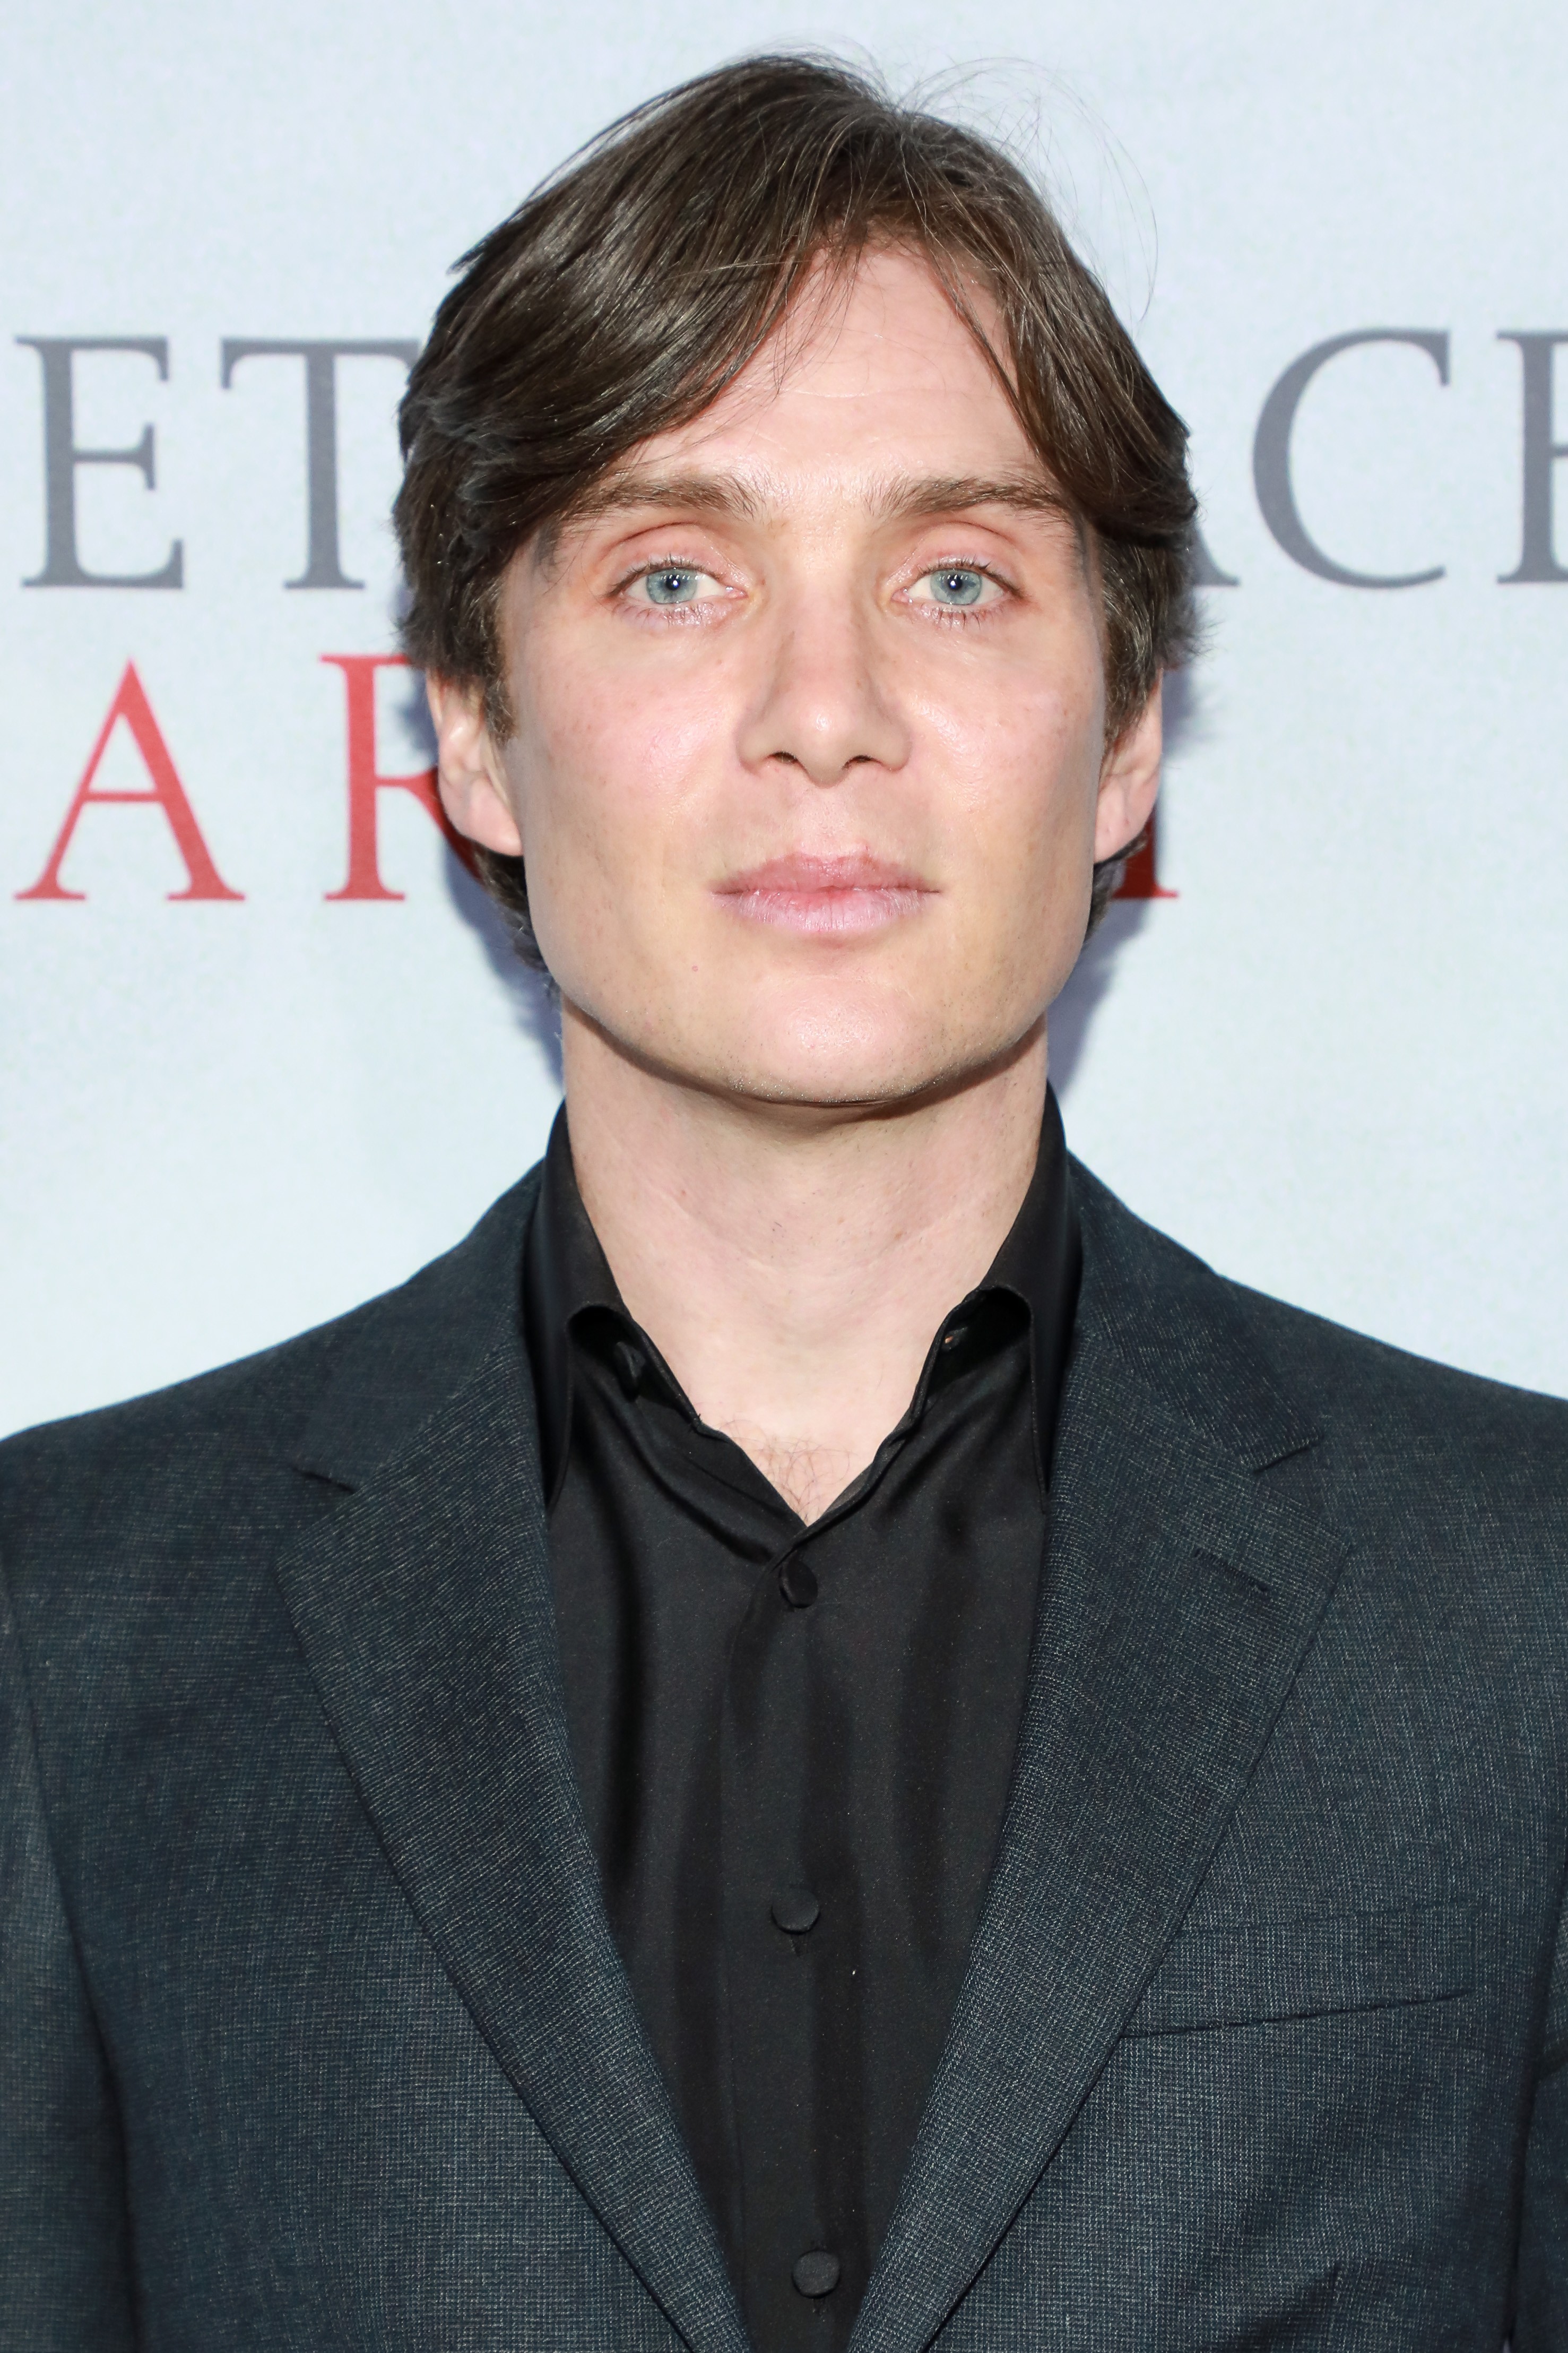 NEW YORK, NY - MARCH 08: Cillian Murphy attends "A Quiet Place Part II" World Premiere at Rose Theater, Jazz at Lincoln Center on March 8, 2020 in New York City. (Photo by Jason Mendez/Getty Images) (Foto: Getty Images)